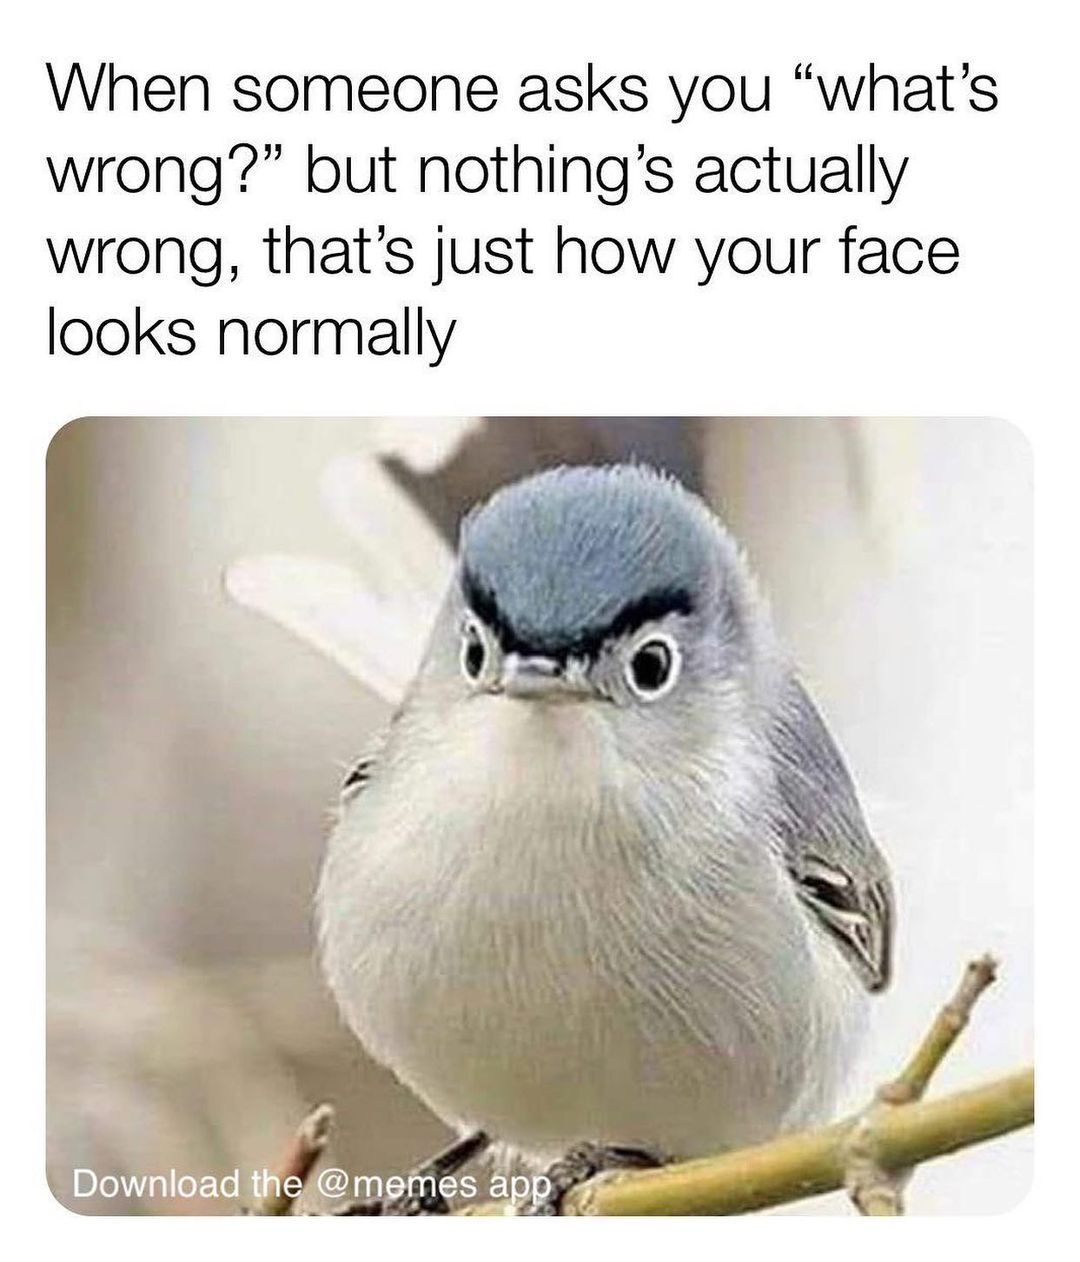 When someone asks you "what's wrong?" but nothing's actually wrong, that's just how your face looks normally.